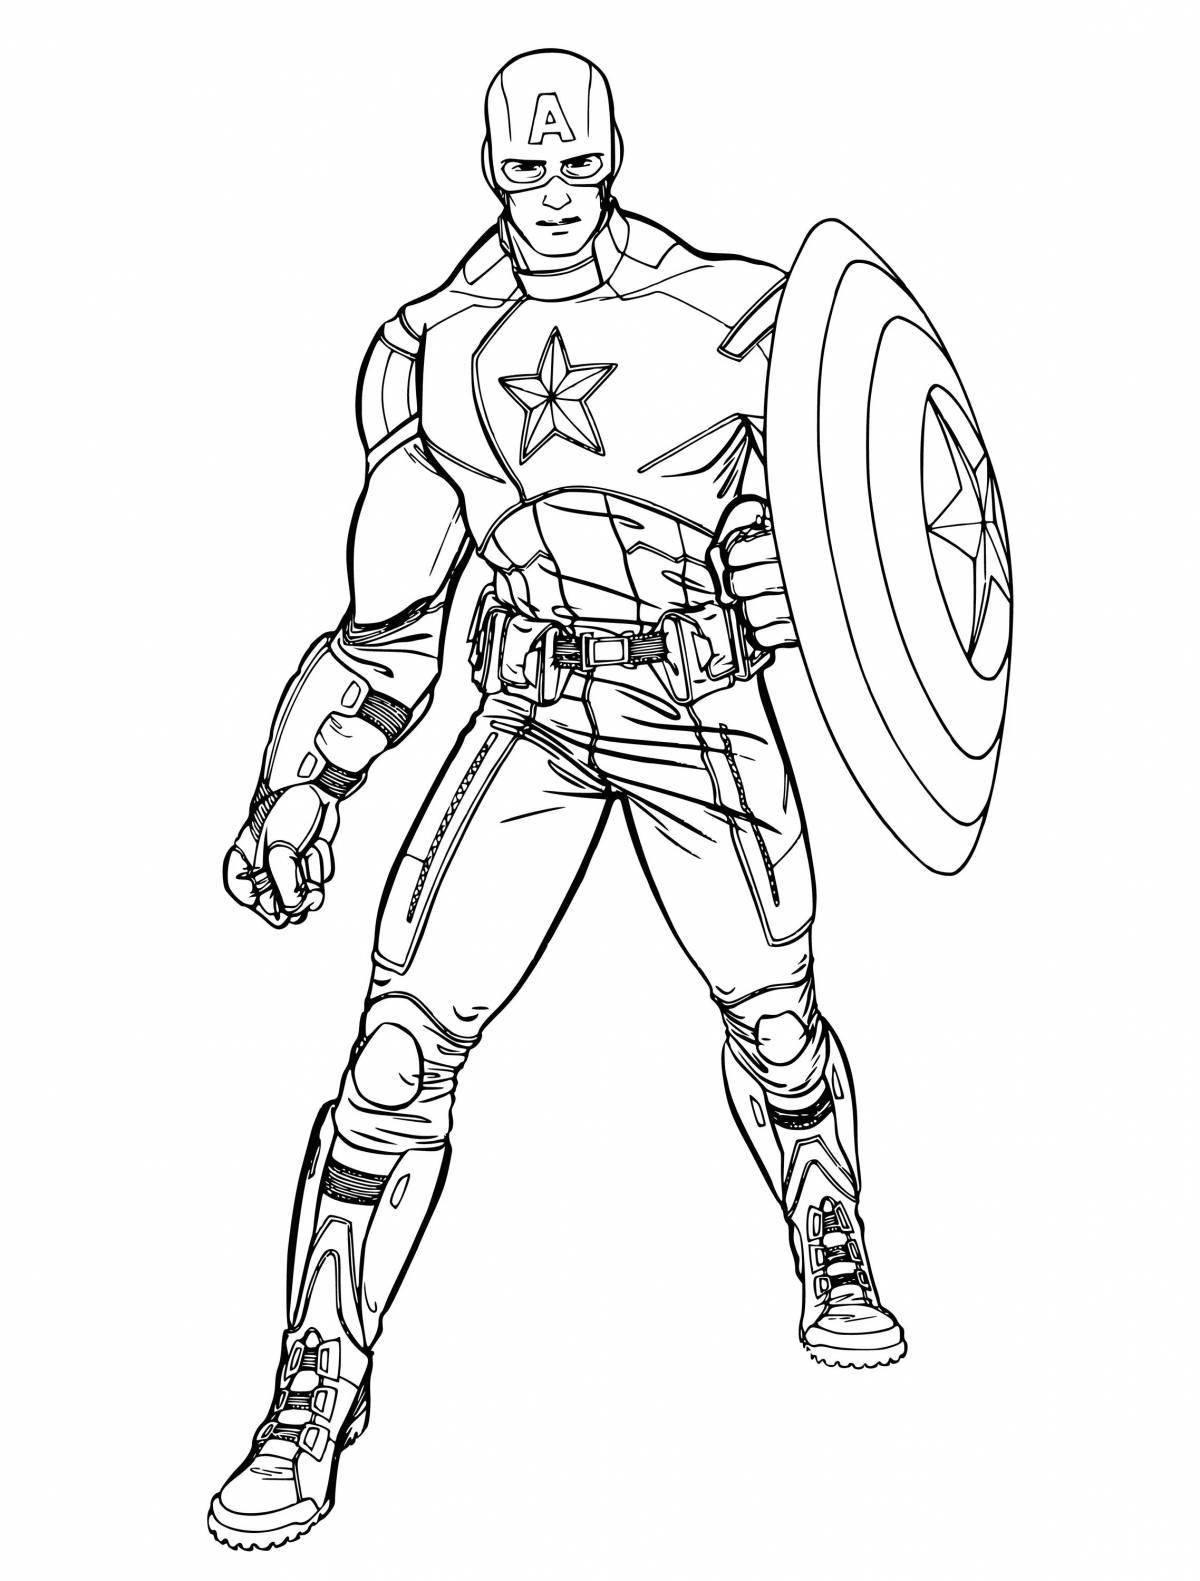 Captain marvel coloring page